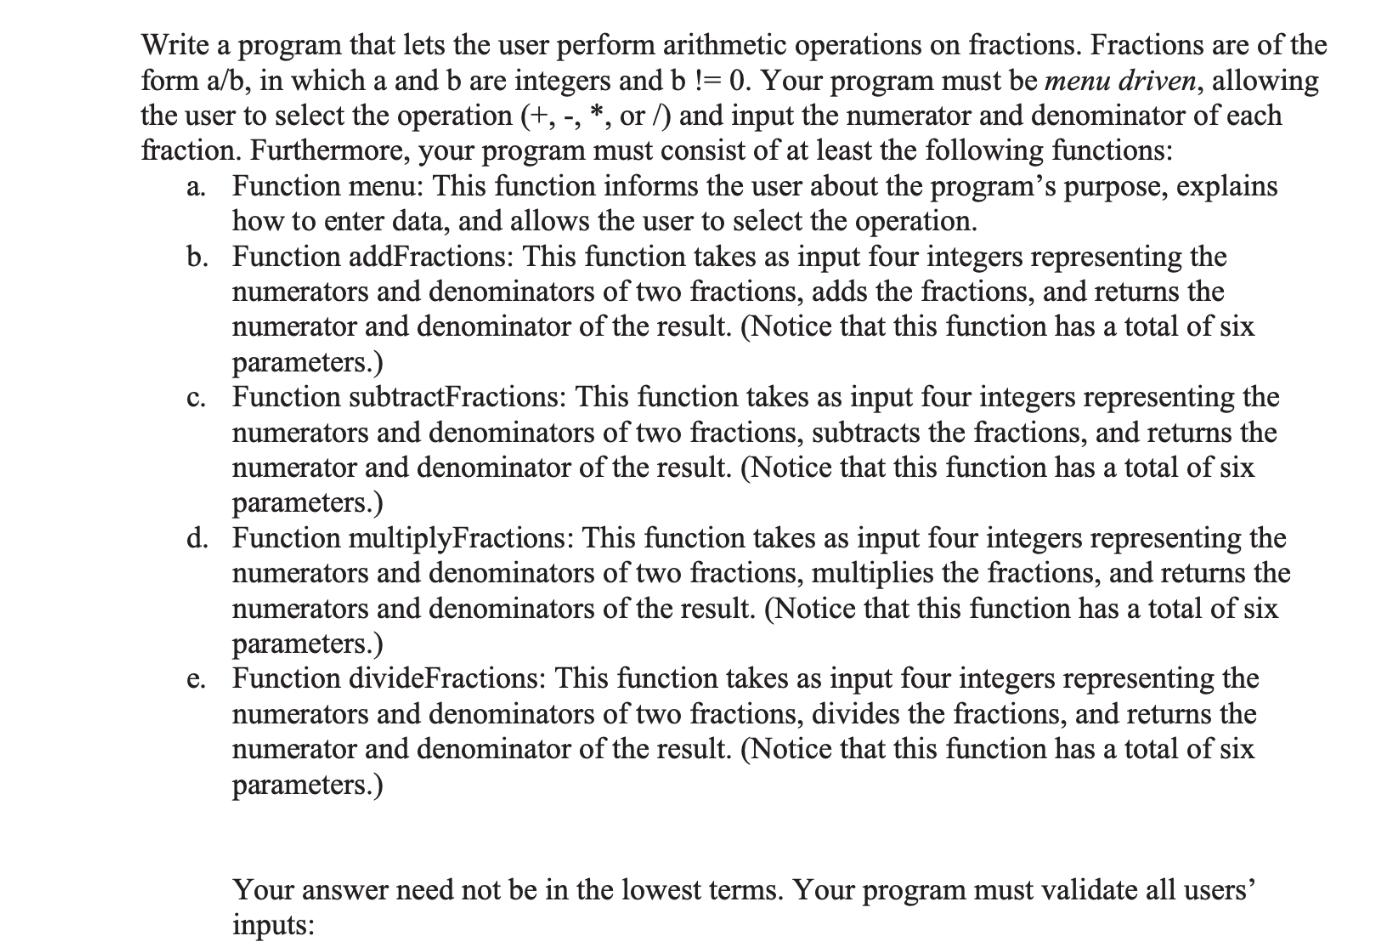 Write a program that lets the user perform arithmetic operations on fractions. Fractions are of the form a/b,